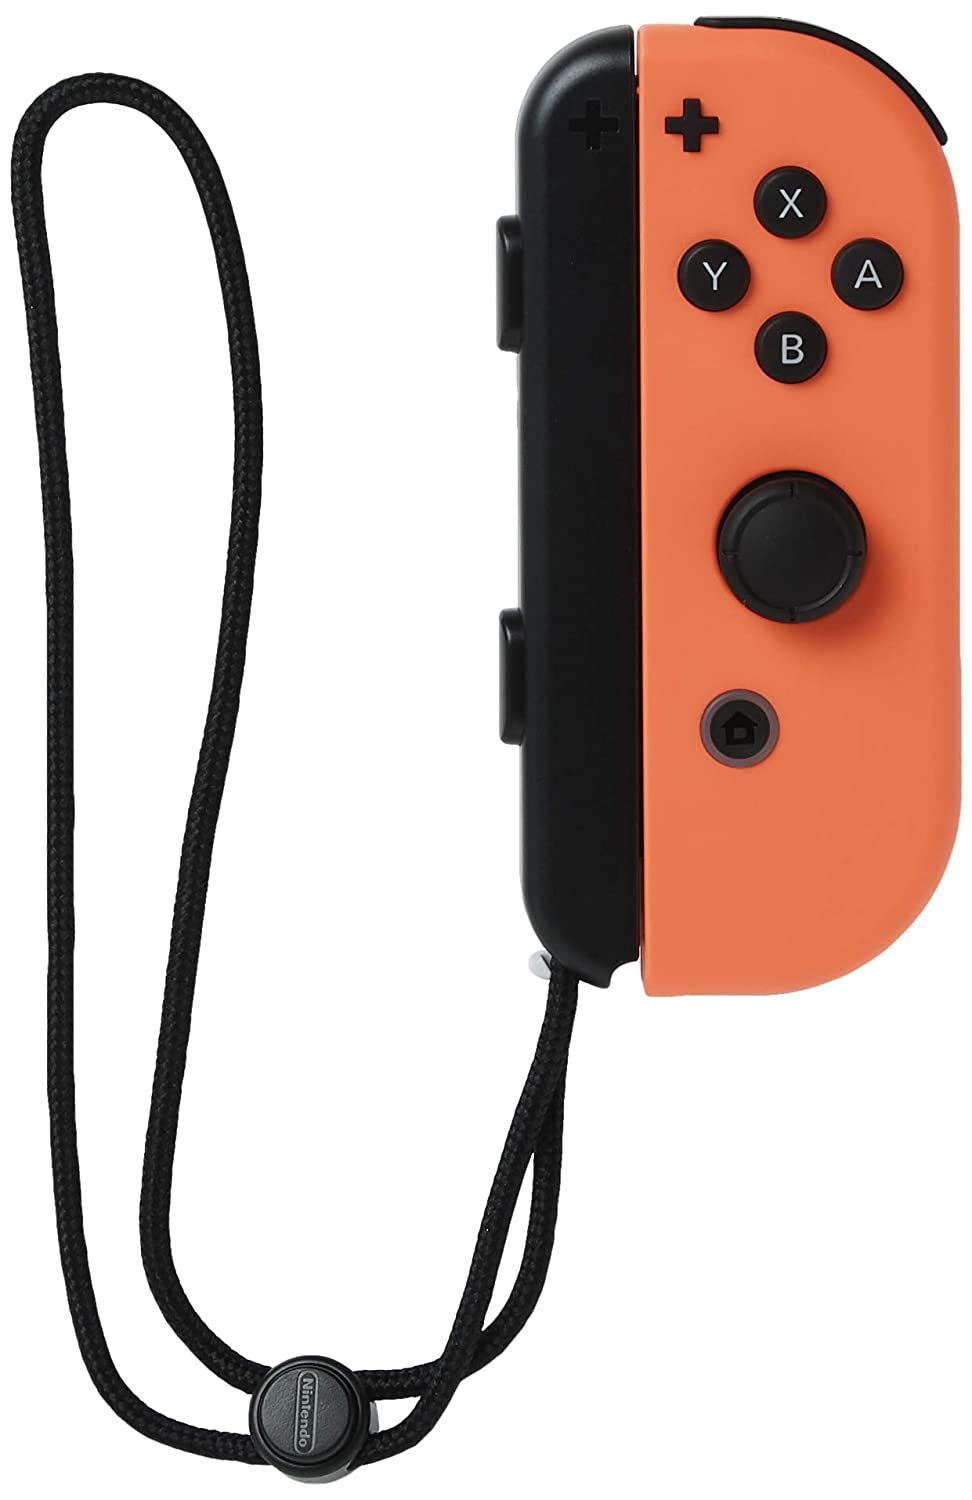 NSW Joy-Con R Side (Neon Red)